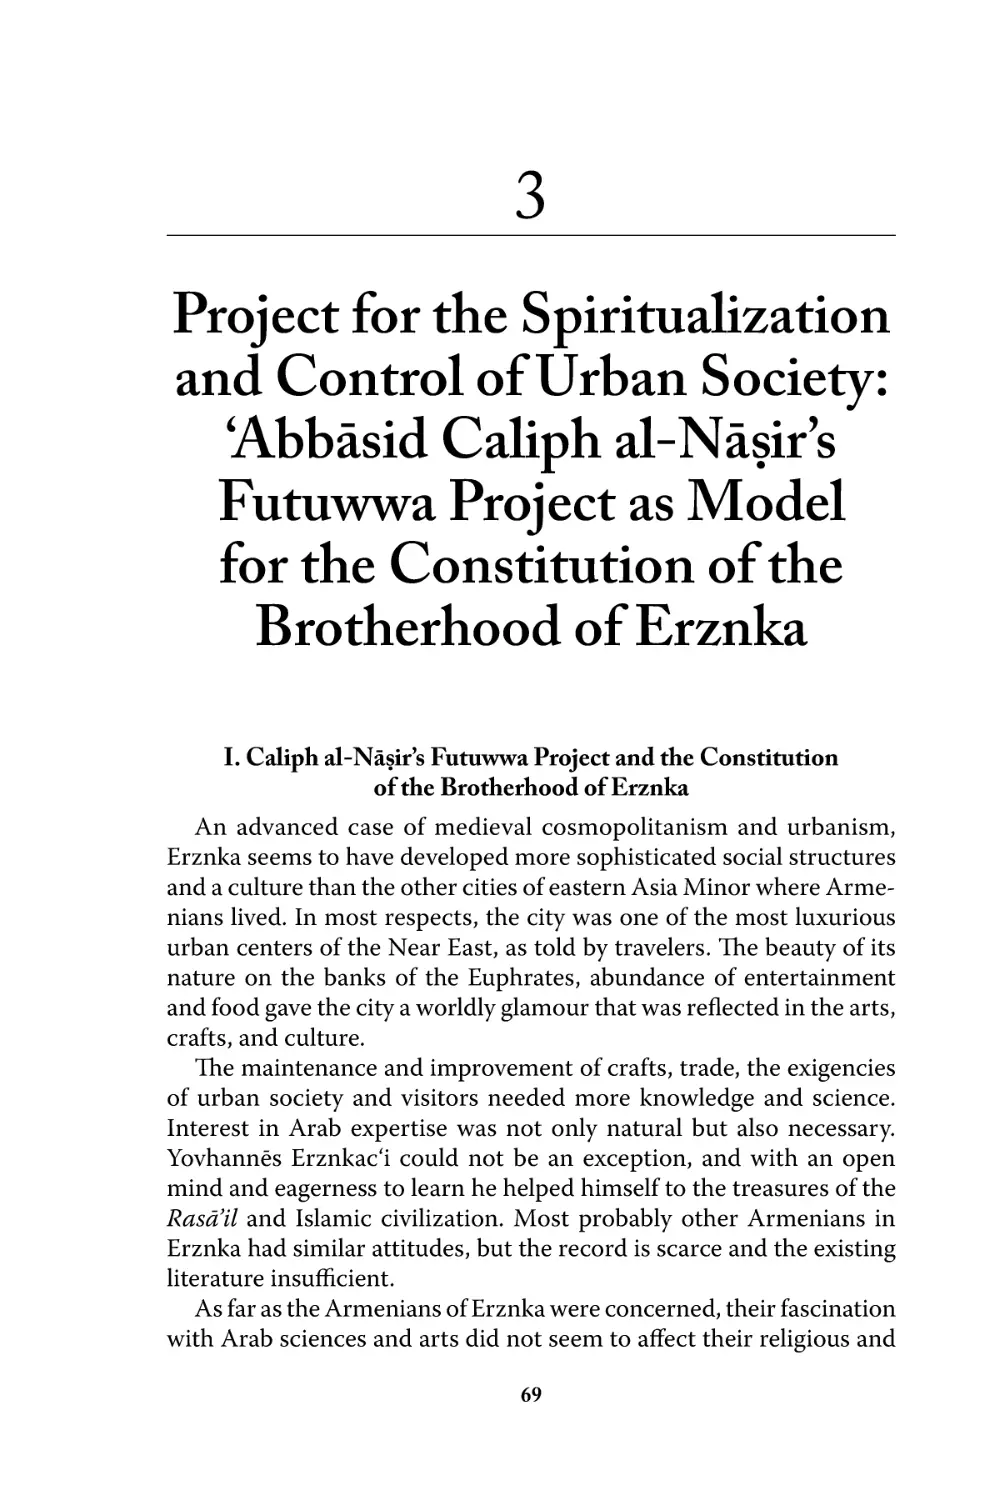 3 Project for the Spiritualization and Control of Urban Society
I.  Caliph al-Nāsir’s Futuwwa Project and the Constitution of the Brotherhood of Erznka